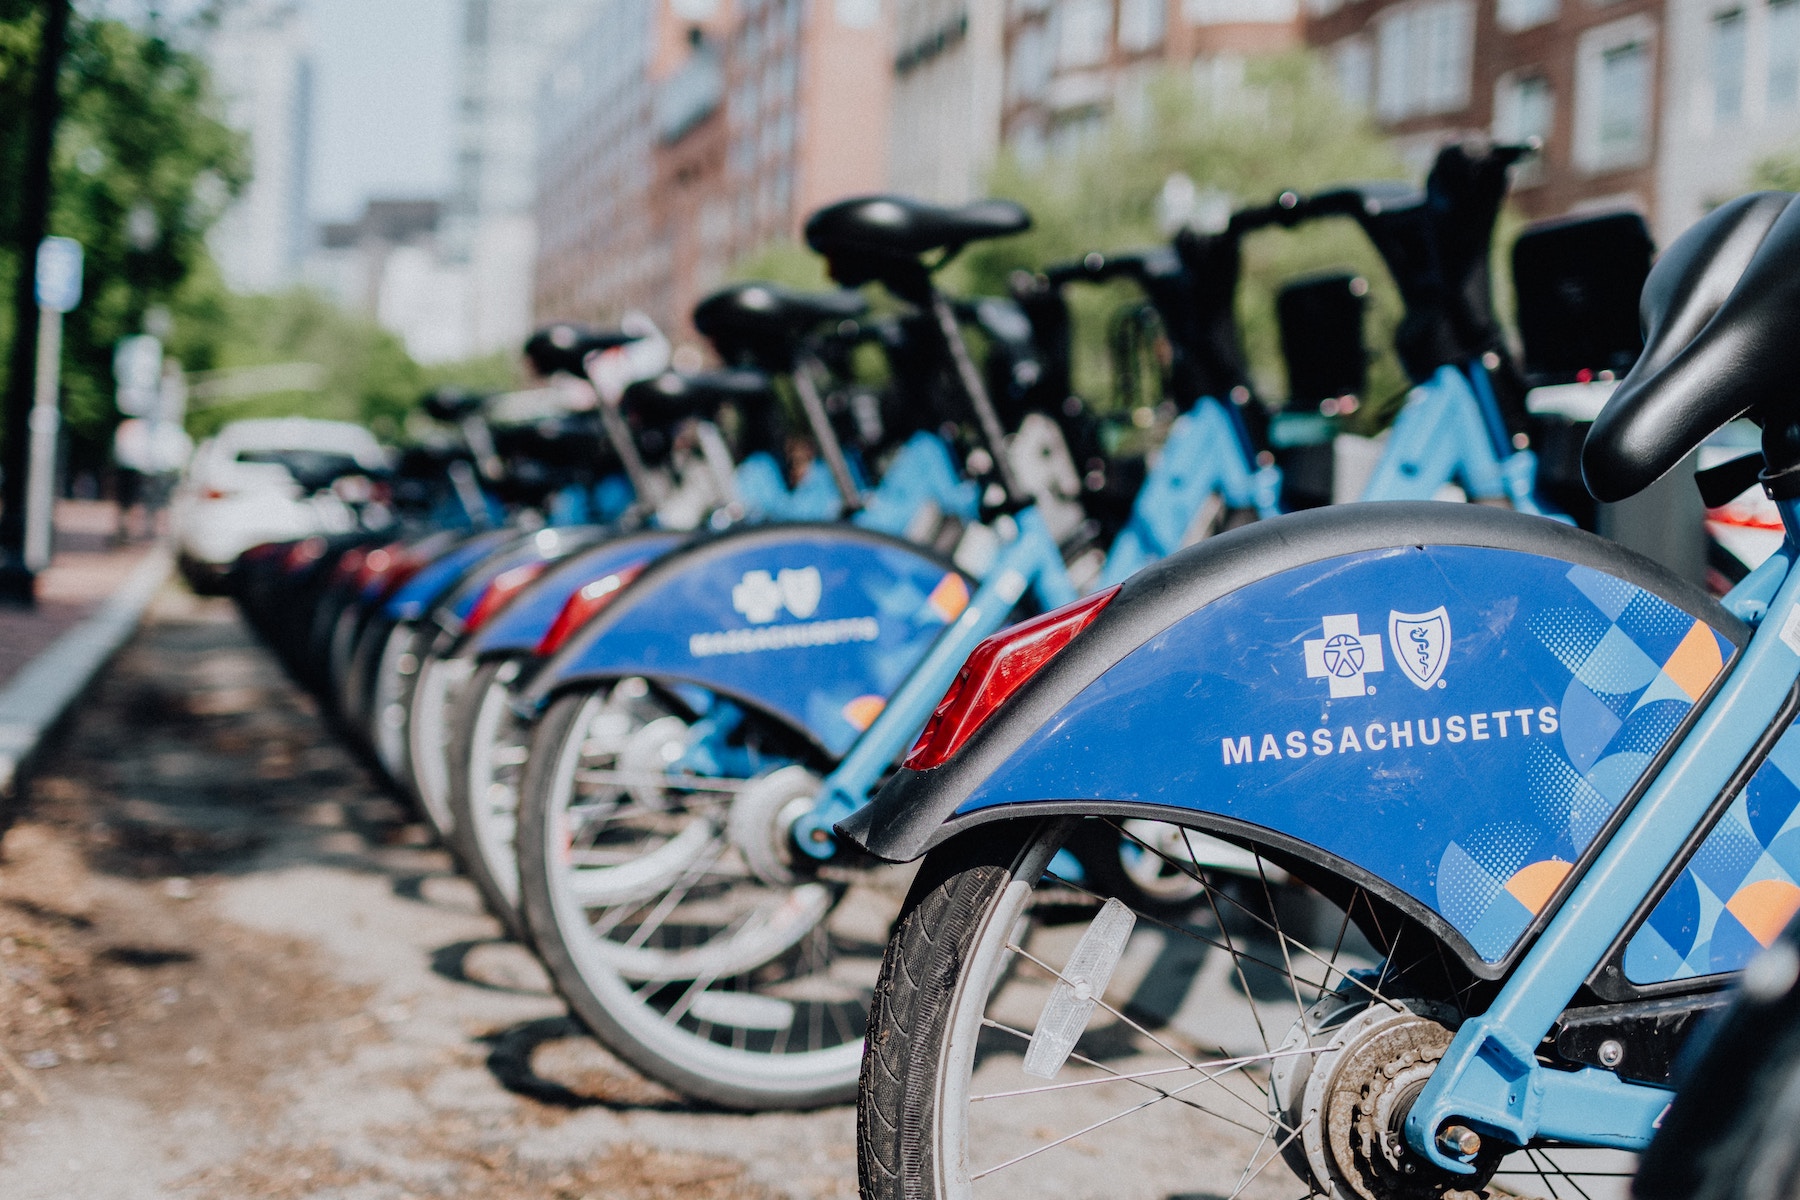 A row of Massachusetts bikes parked in a bike-share station